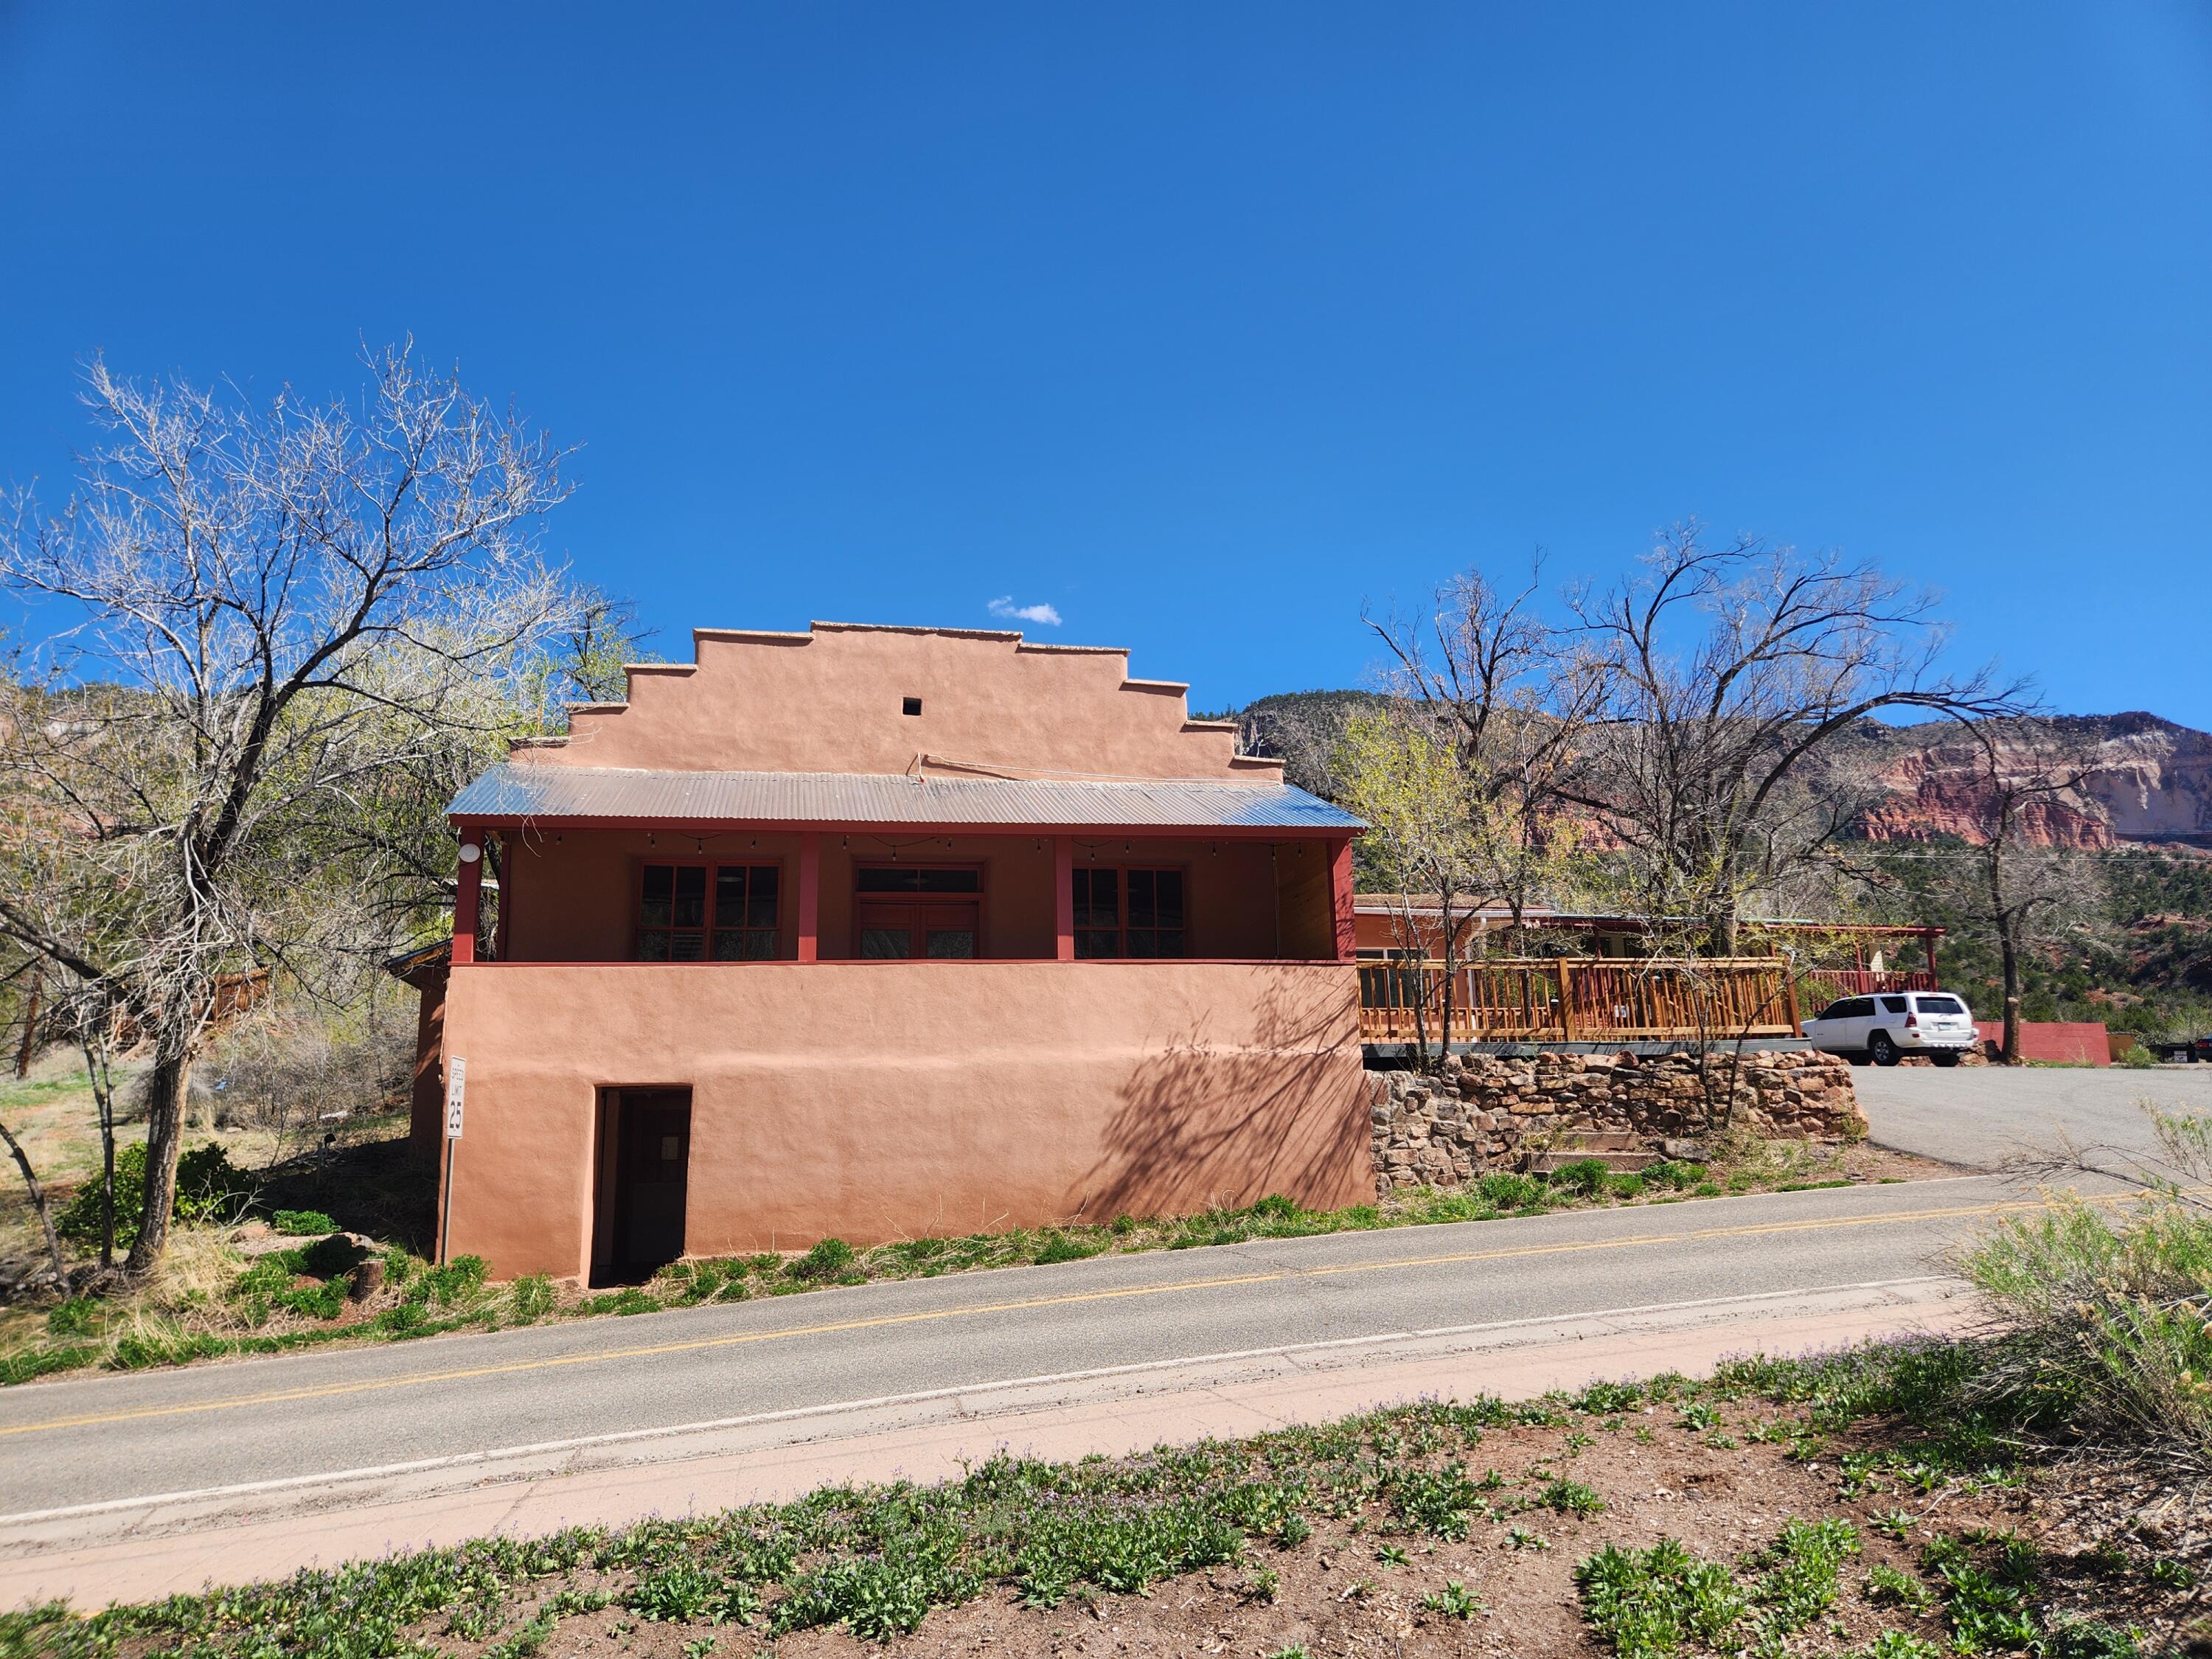 17526 Nm-4, Jemez Springs, New Mexico 87025, ,Commercial Lease,For Rent,17526 Nm-4,1060080